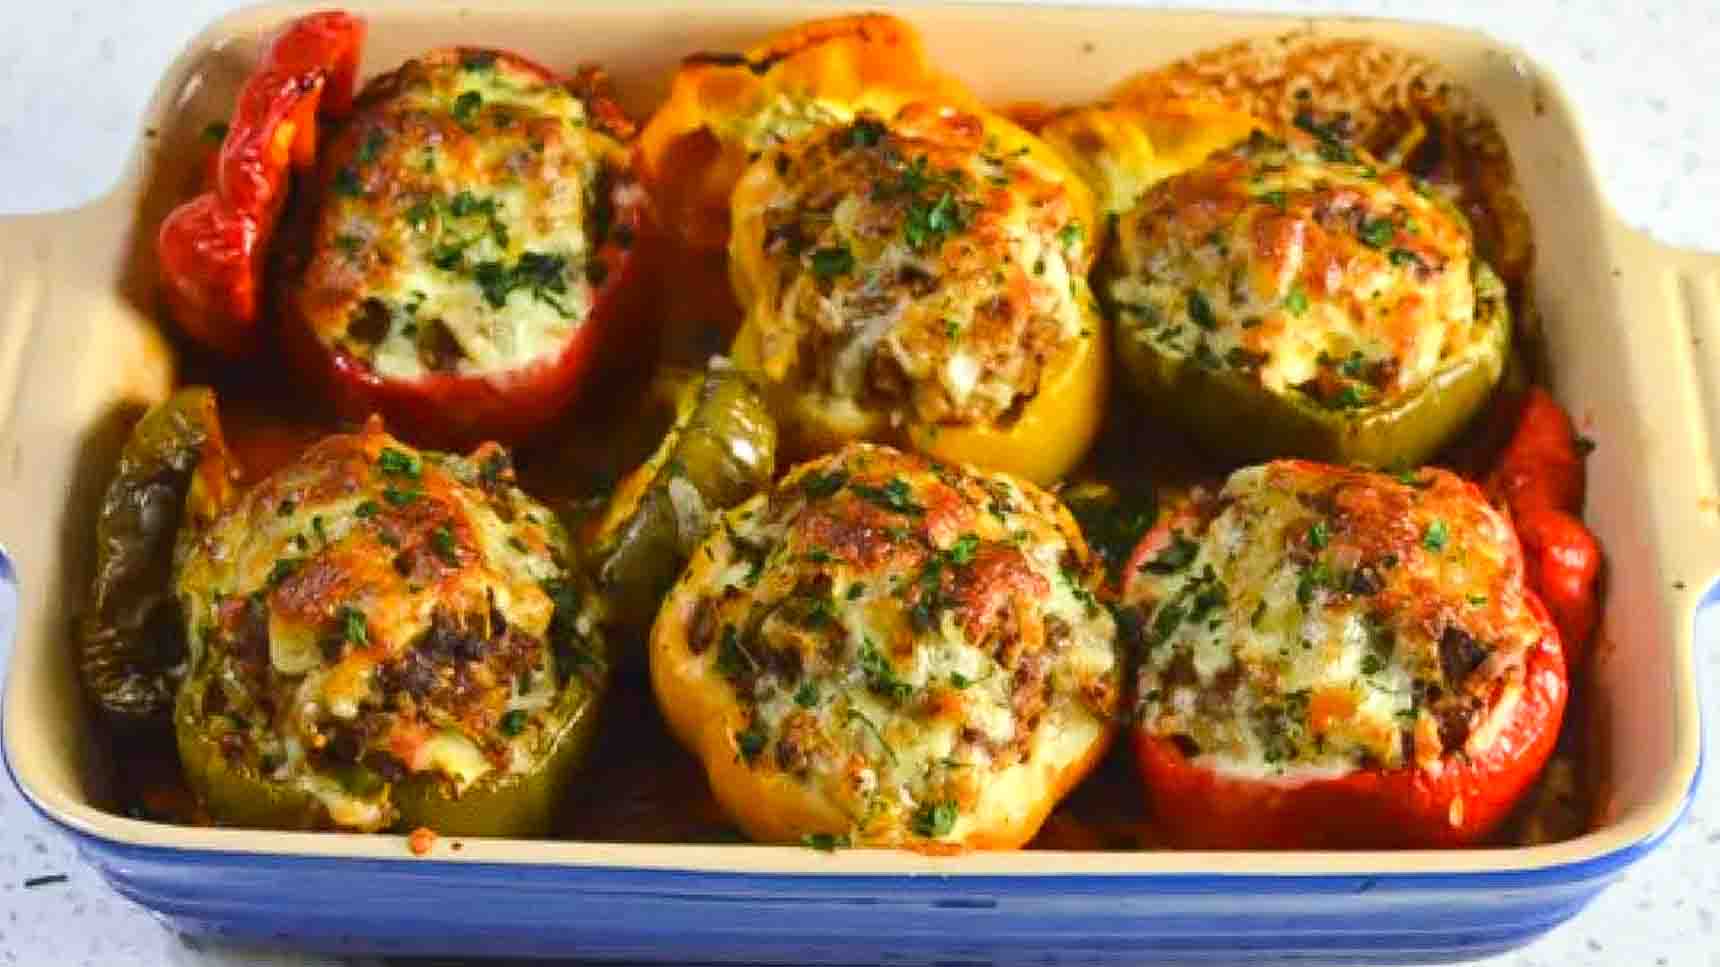 Stuffed Bell Peppers with Beef & Rice